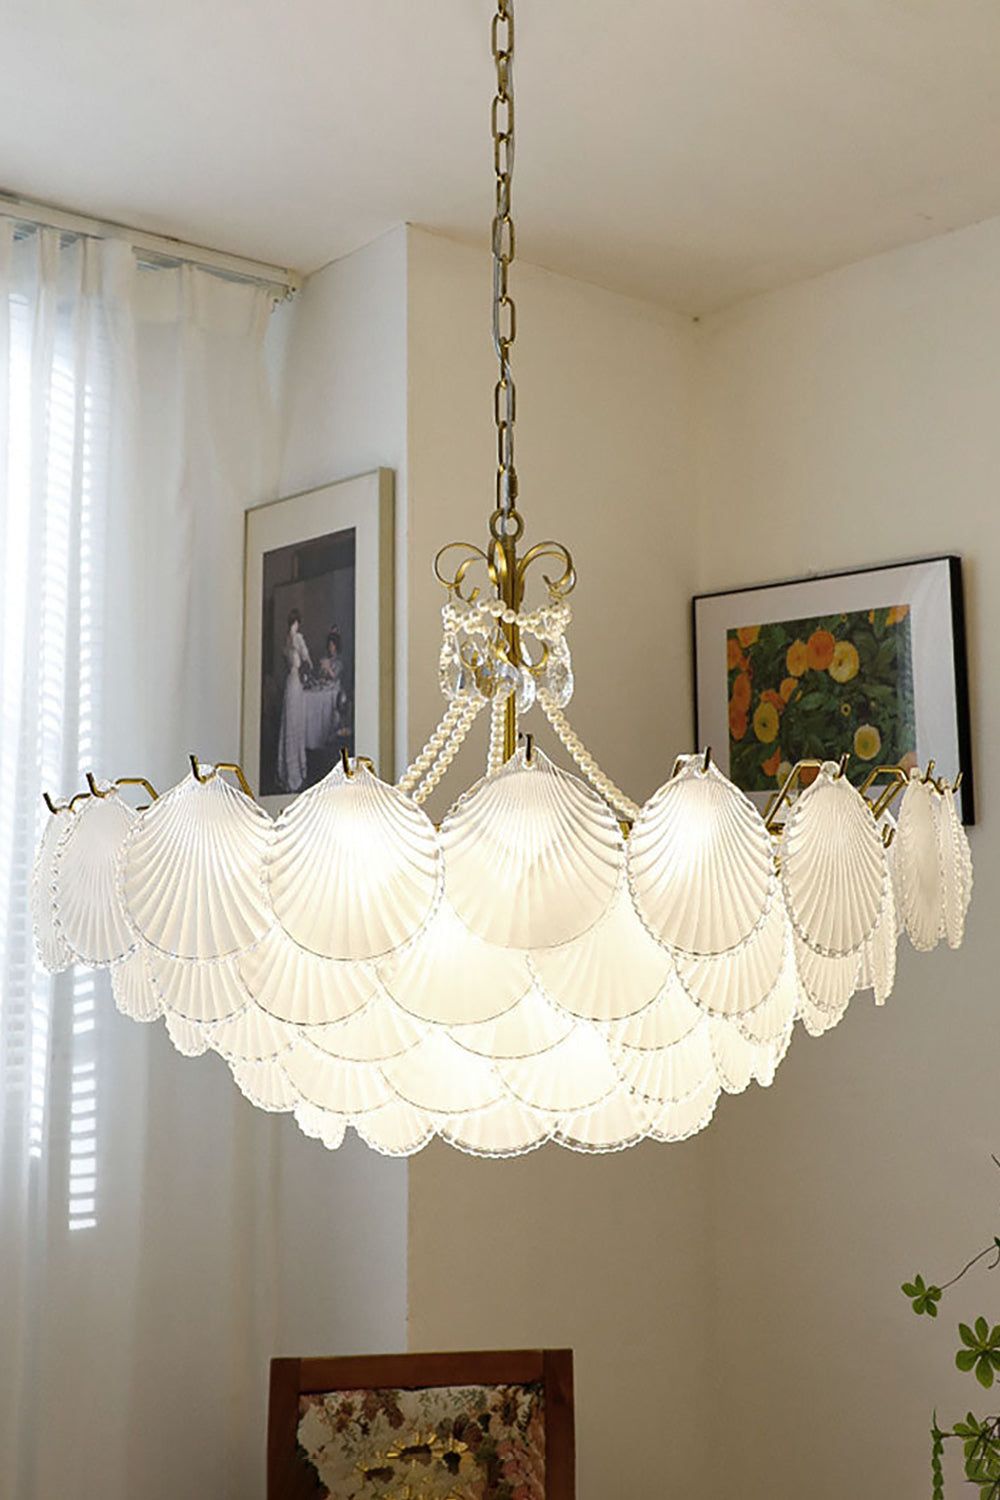 Use Lights “How to Brighten Your Home and Save Energy with Lighting Options”